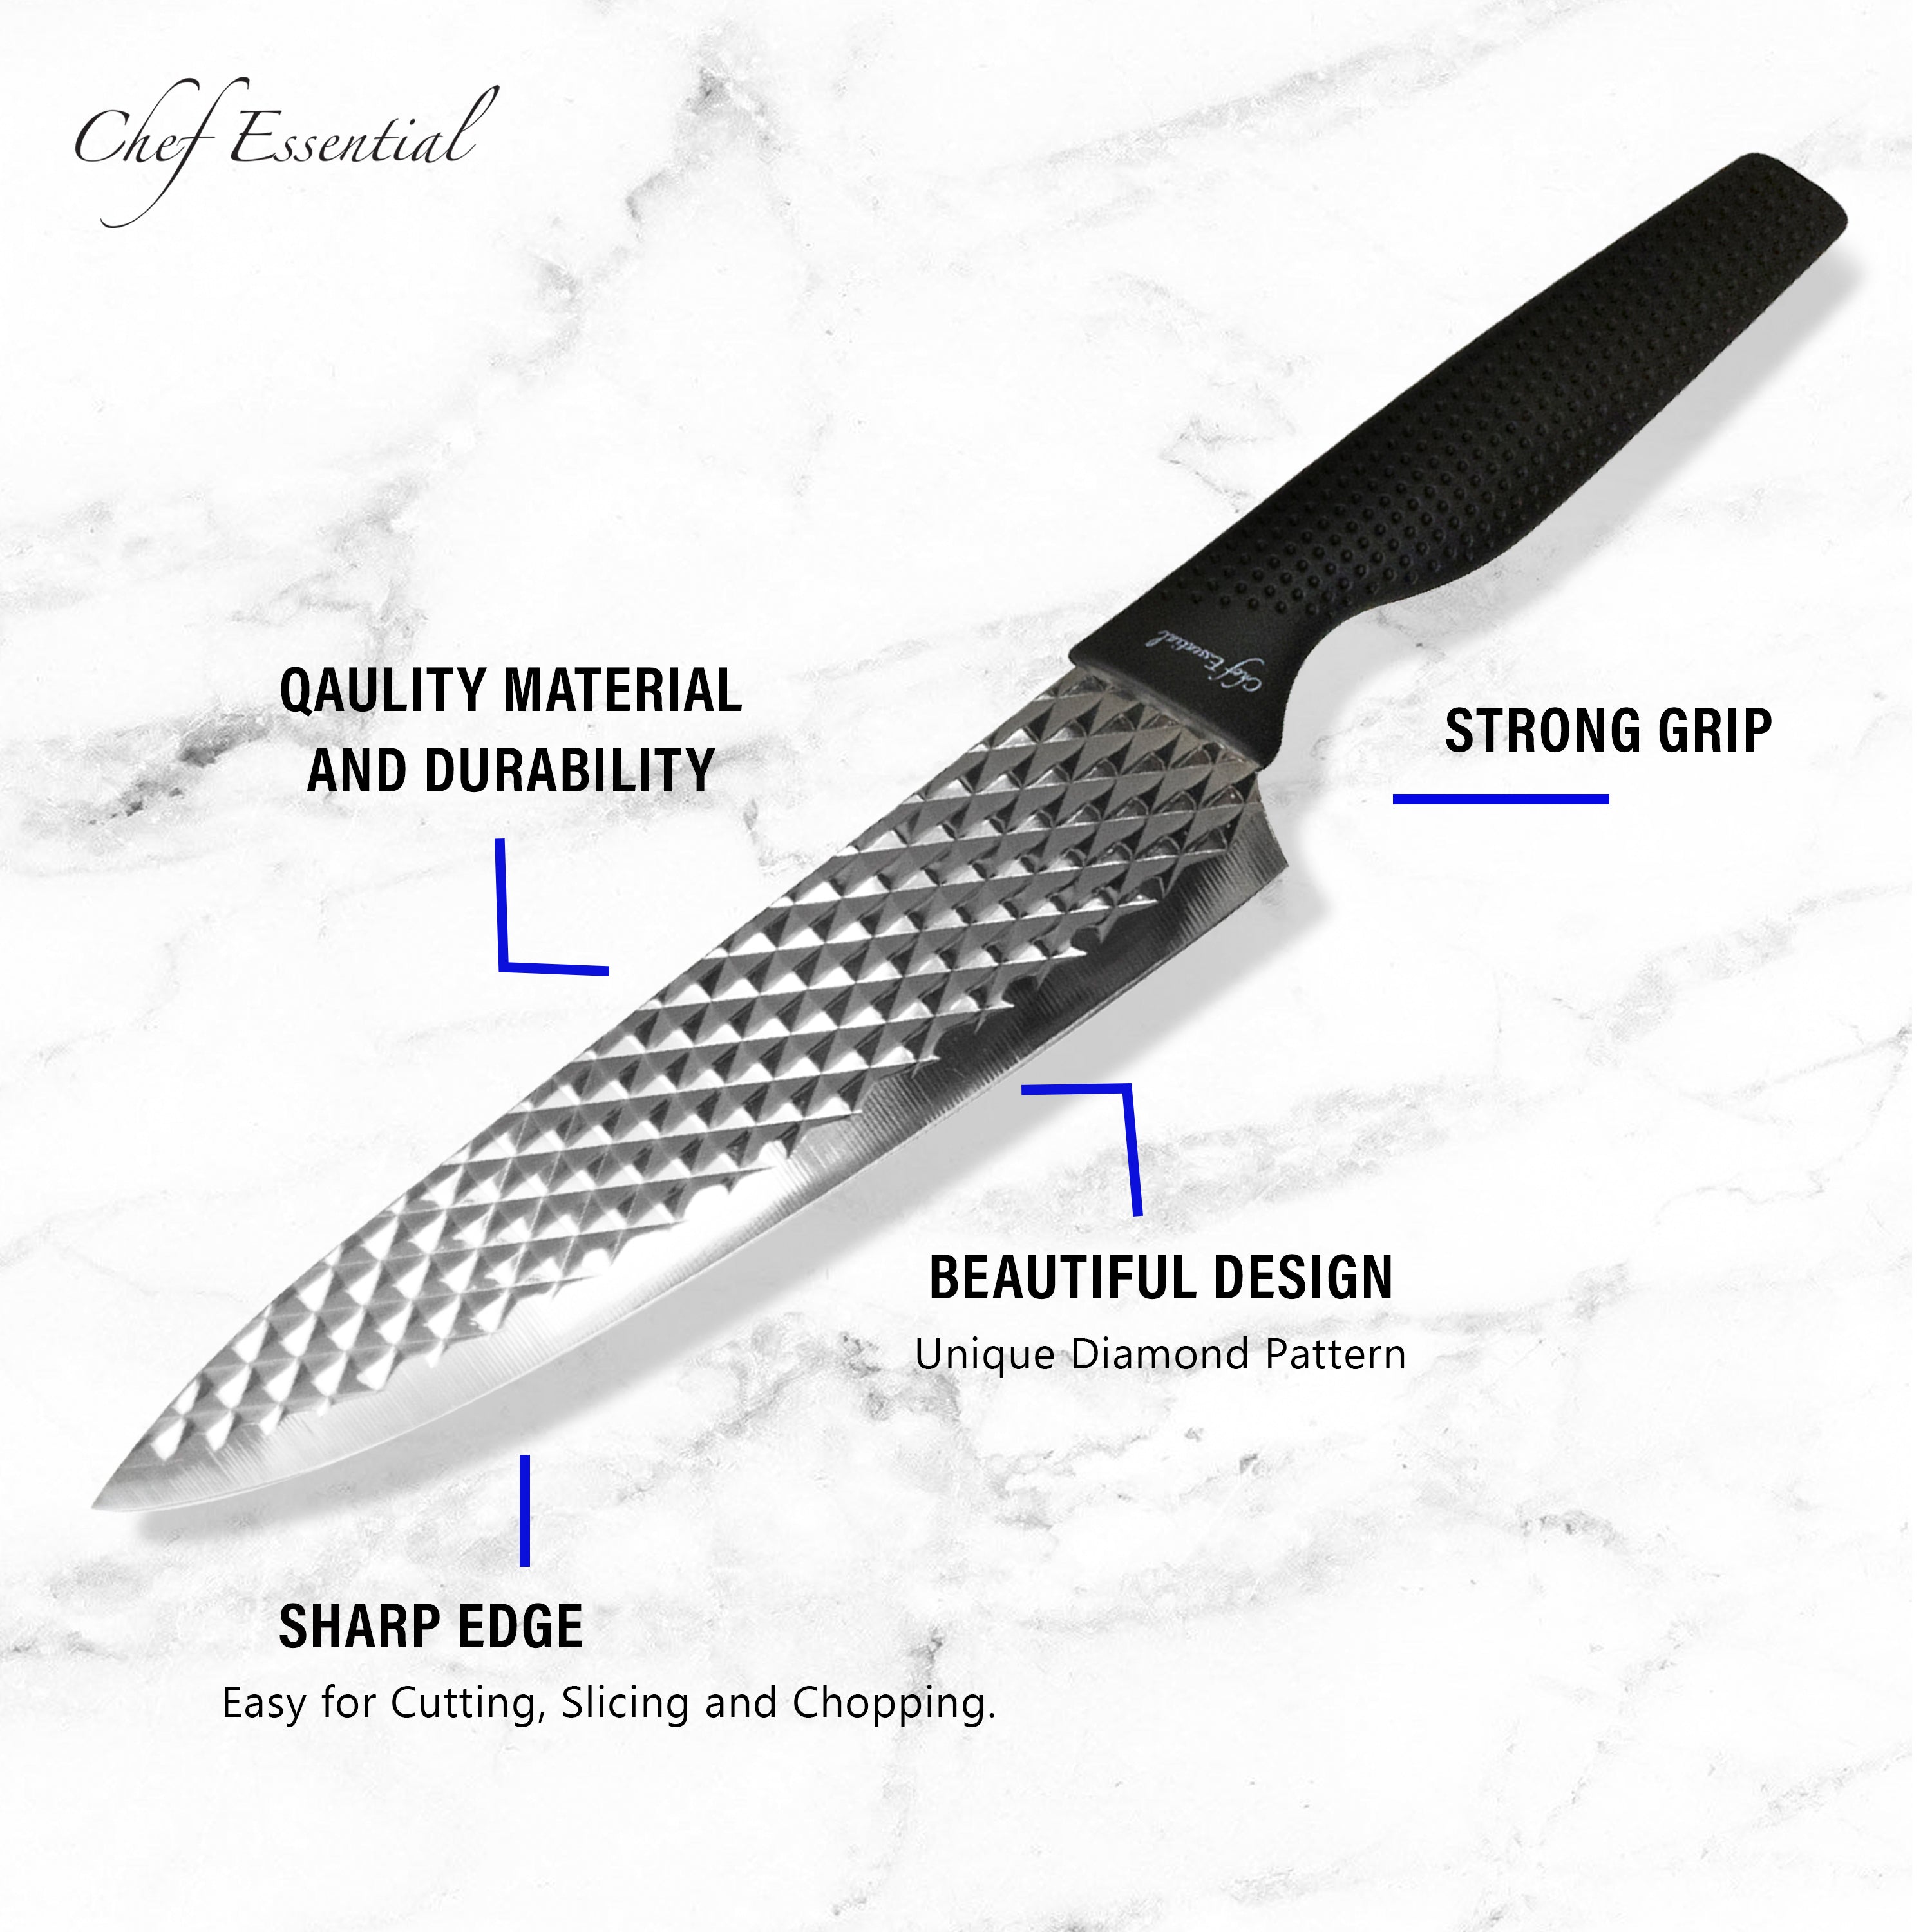  Chef Essential Carbon Steel Culinary Knife Set – 6-Piece Sharp Knife  Set – Meat, Veggie, Bread Knife Set – Nonstick Chef Knife Cooking Knives –  Professional Sharp Kitchen Knife Set Without